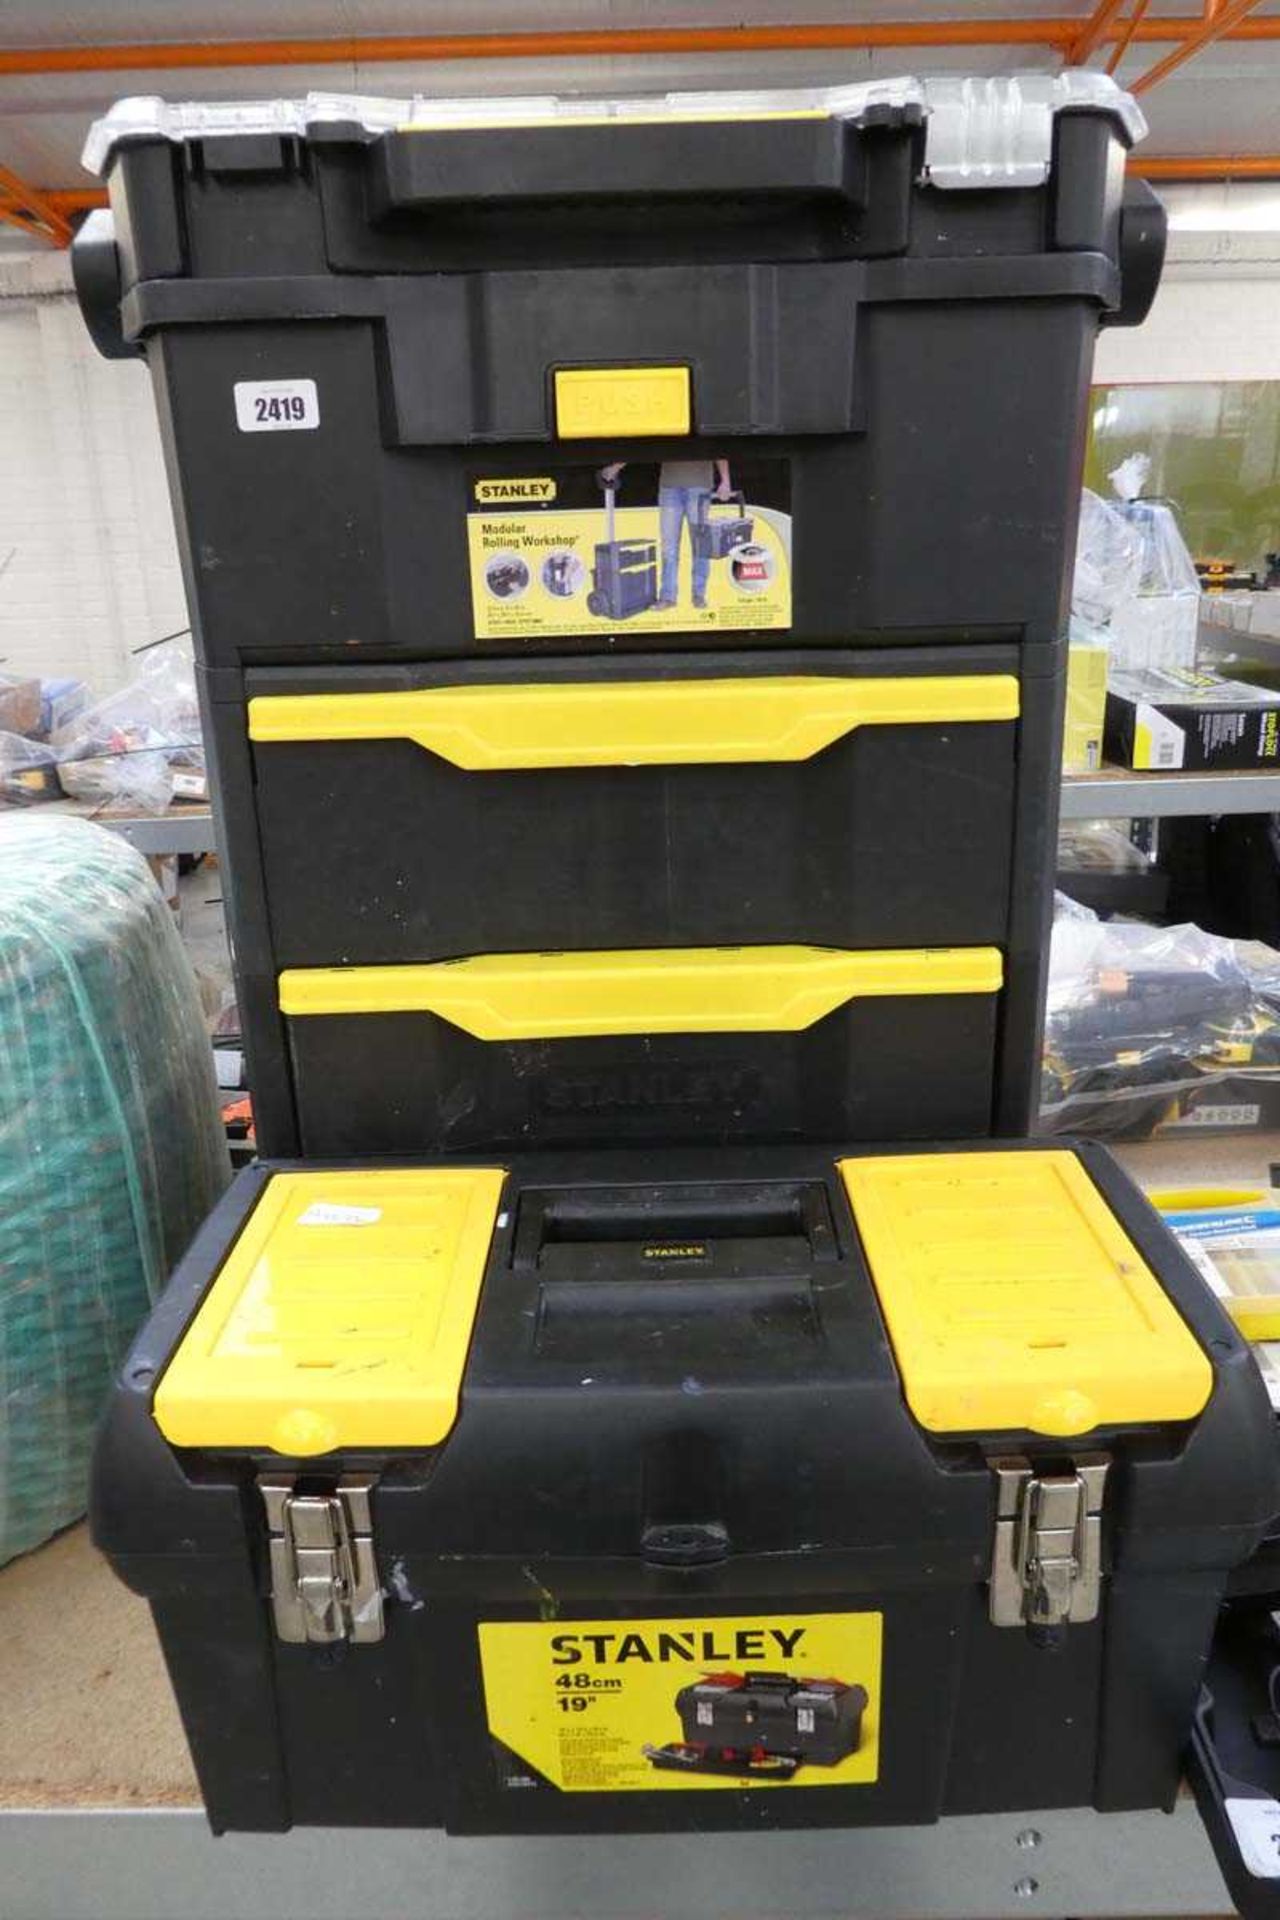 Stanley modular rolling tool box, together with a Stanley 19" toolbox